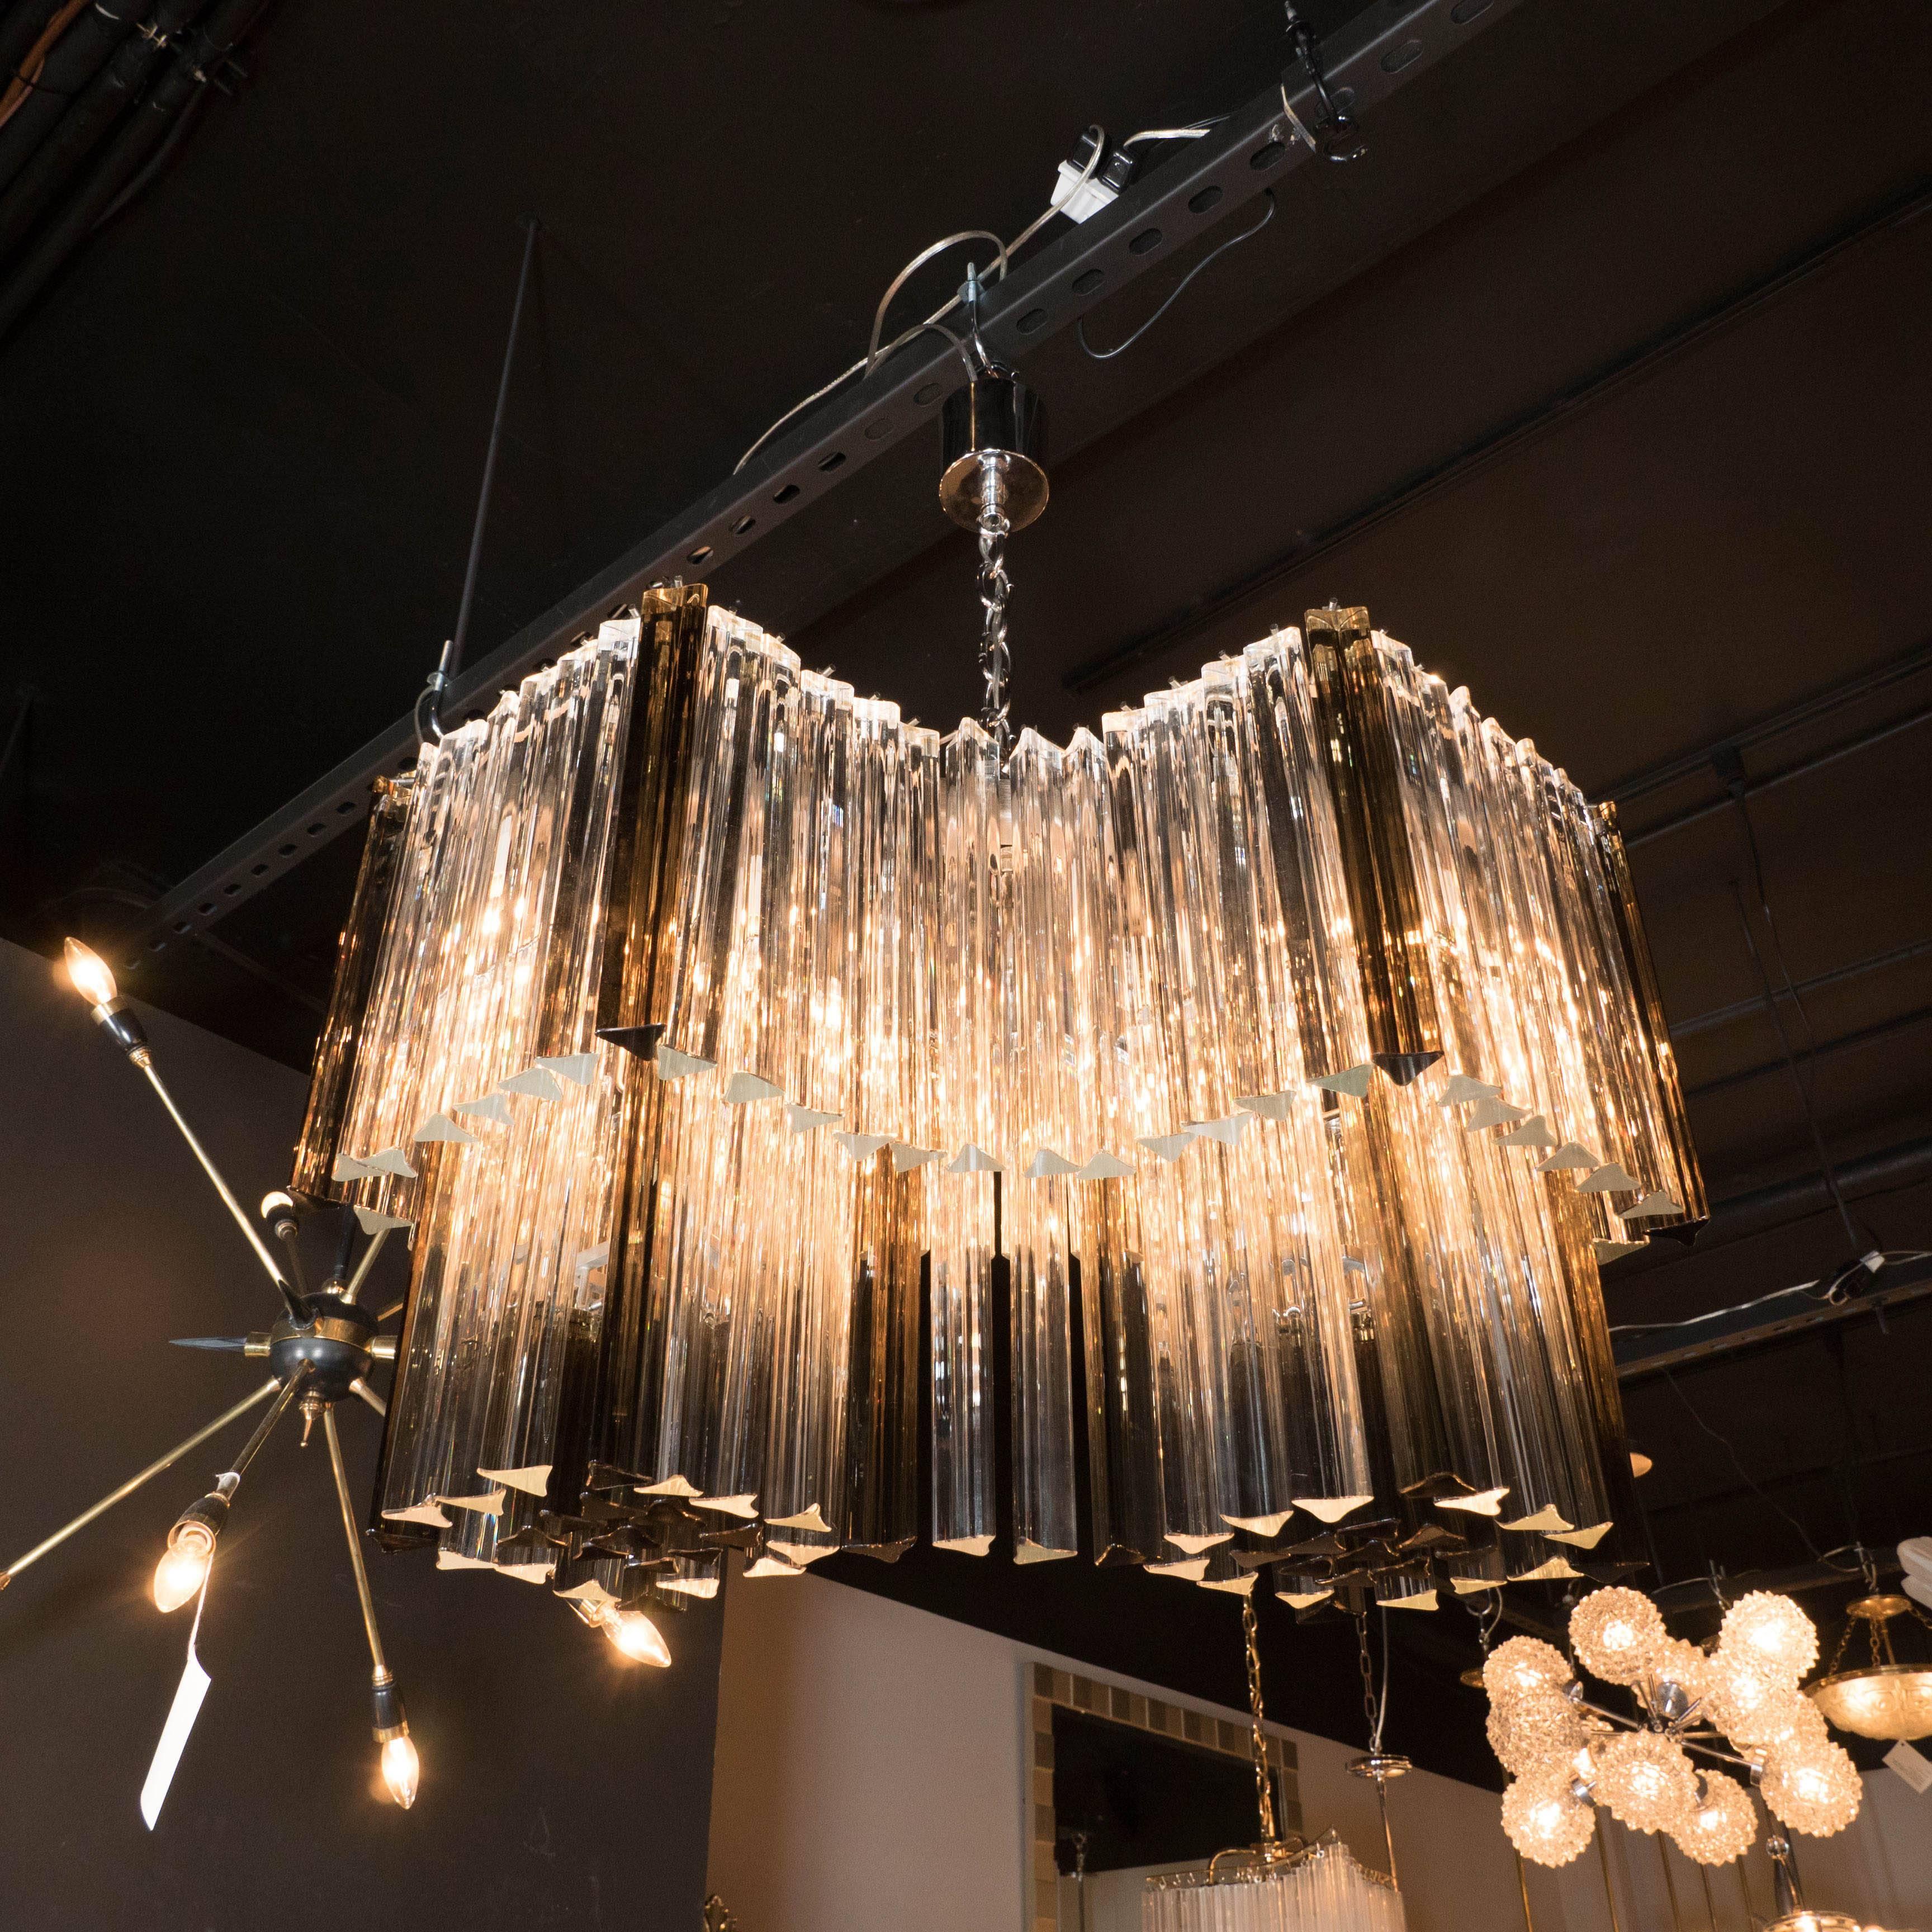 A Mid-Century infinity chandelier in smoked and clear Murano triedre prisms by Camer. Two tiers of infinity-shaped individually hung crystal successions form a waterfall effect. Gray-smoked crystals break up the clarity and add depth to the piece.